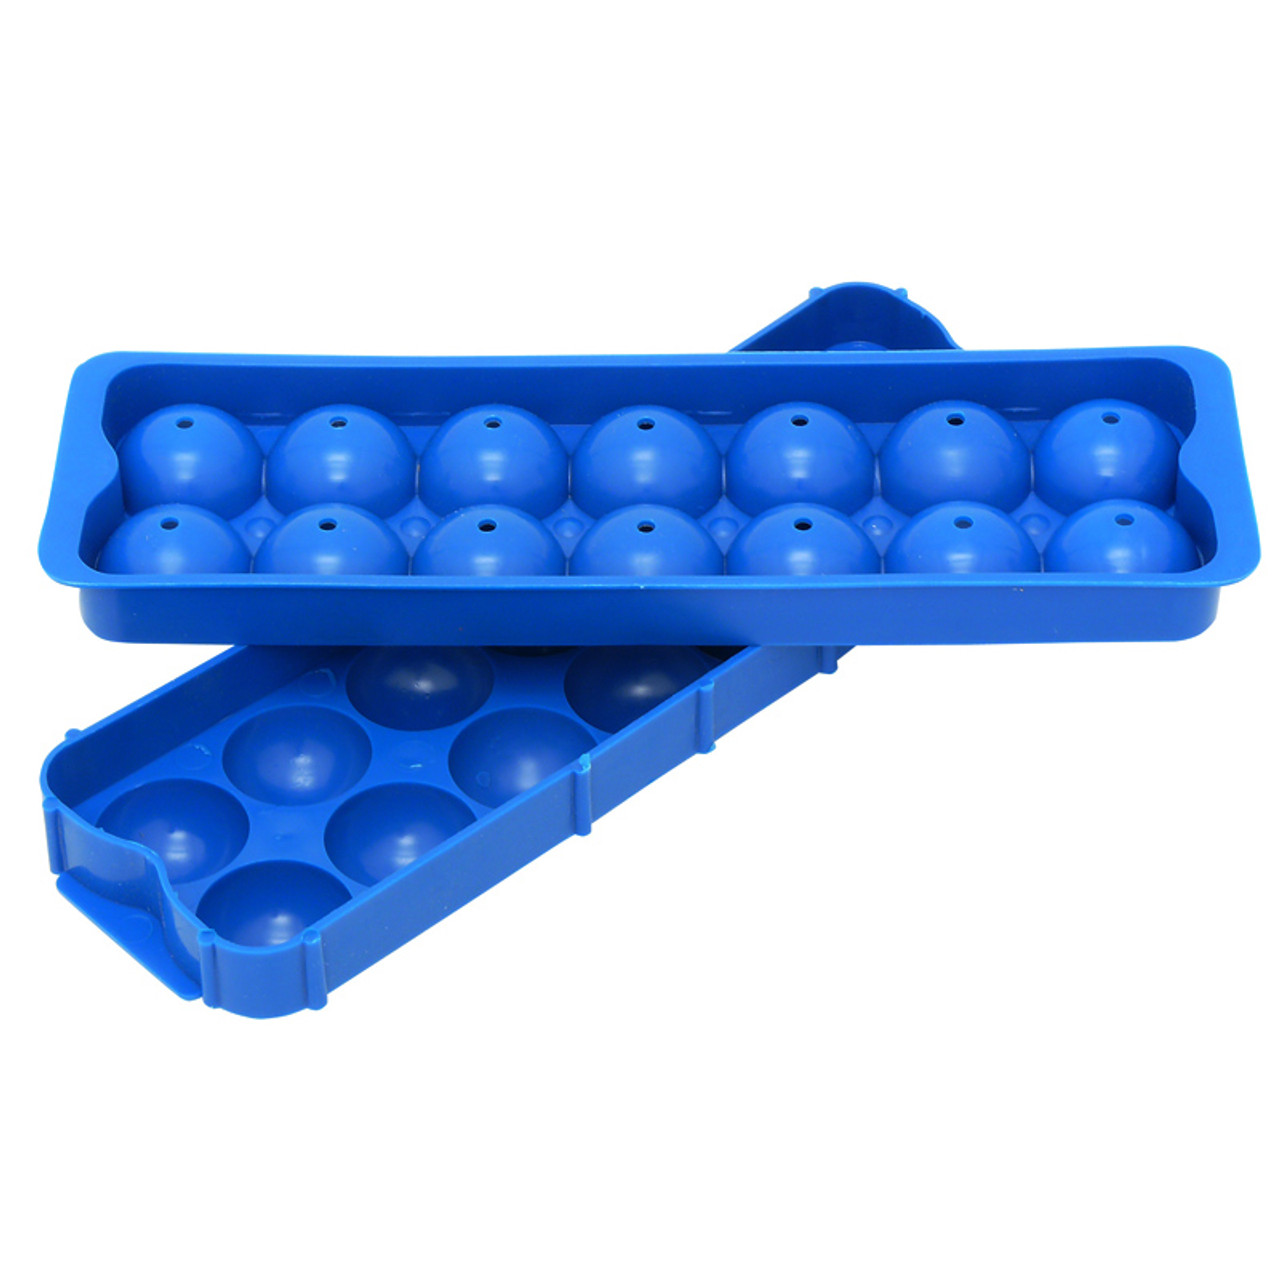 Plactic Pink And Blue Ice Cube Trays - ice tray - ice ball maker